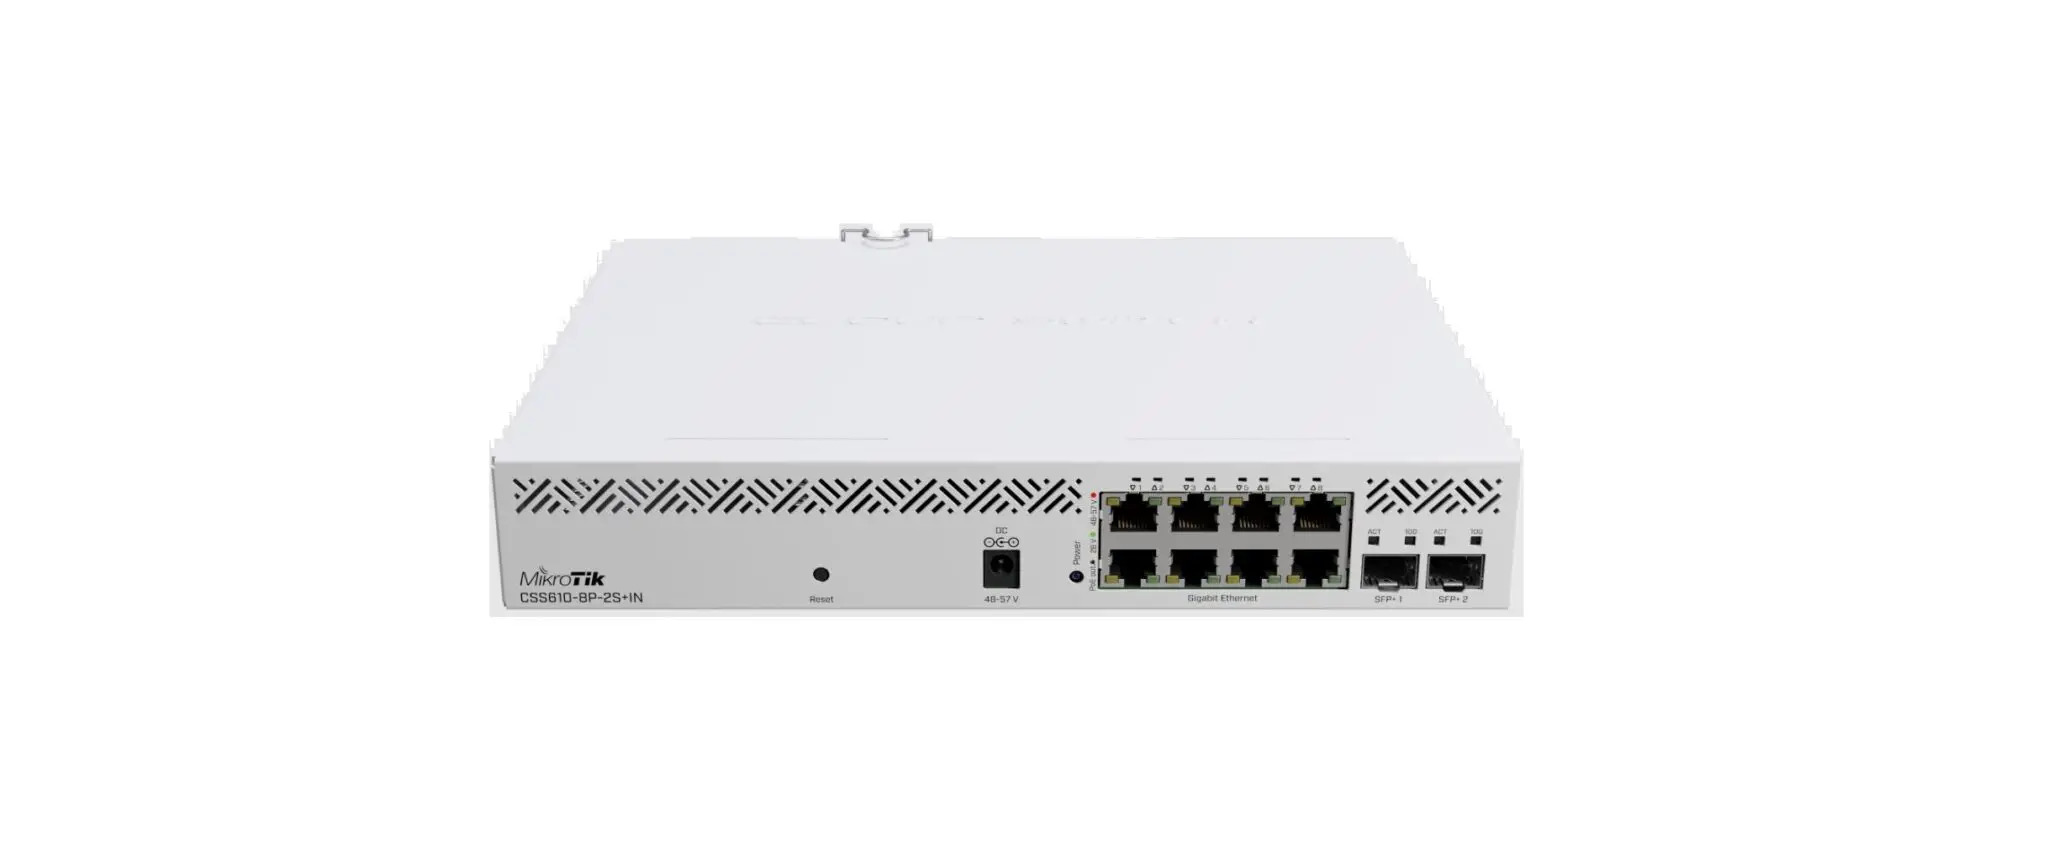 CSS610-8P-2S+IN Smart PoE Switch